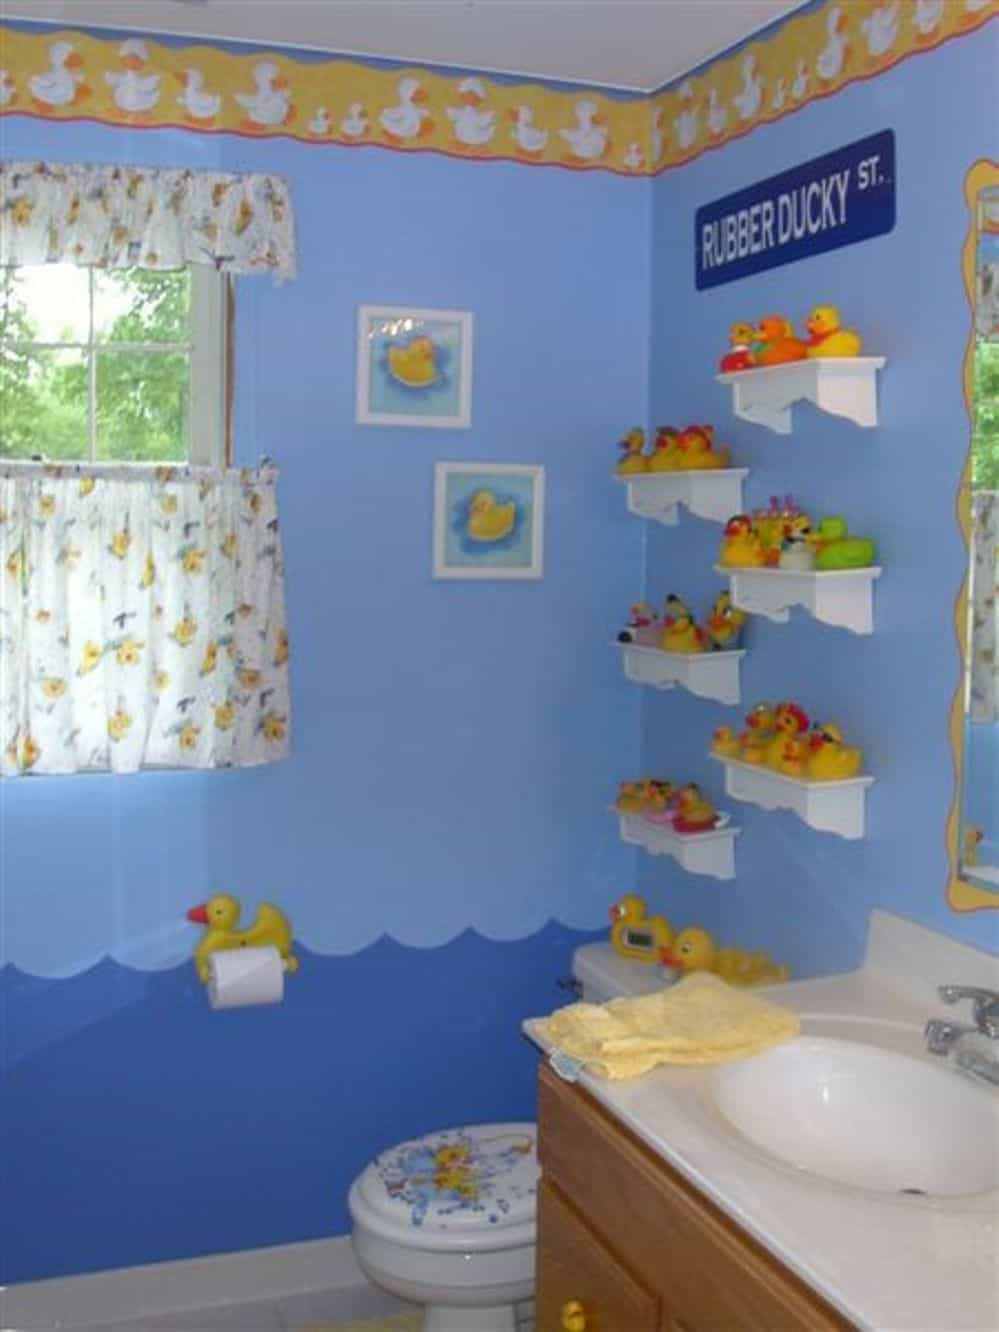 Rubber Ducky Bathroom Decor
 Bathroom With Rubber Duckies Murals And Toys Fun And